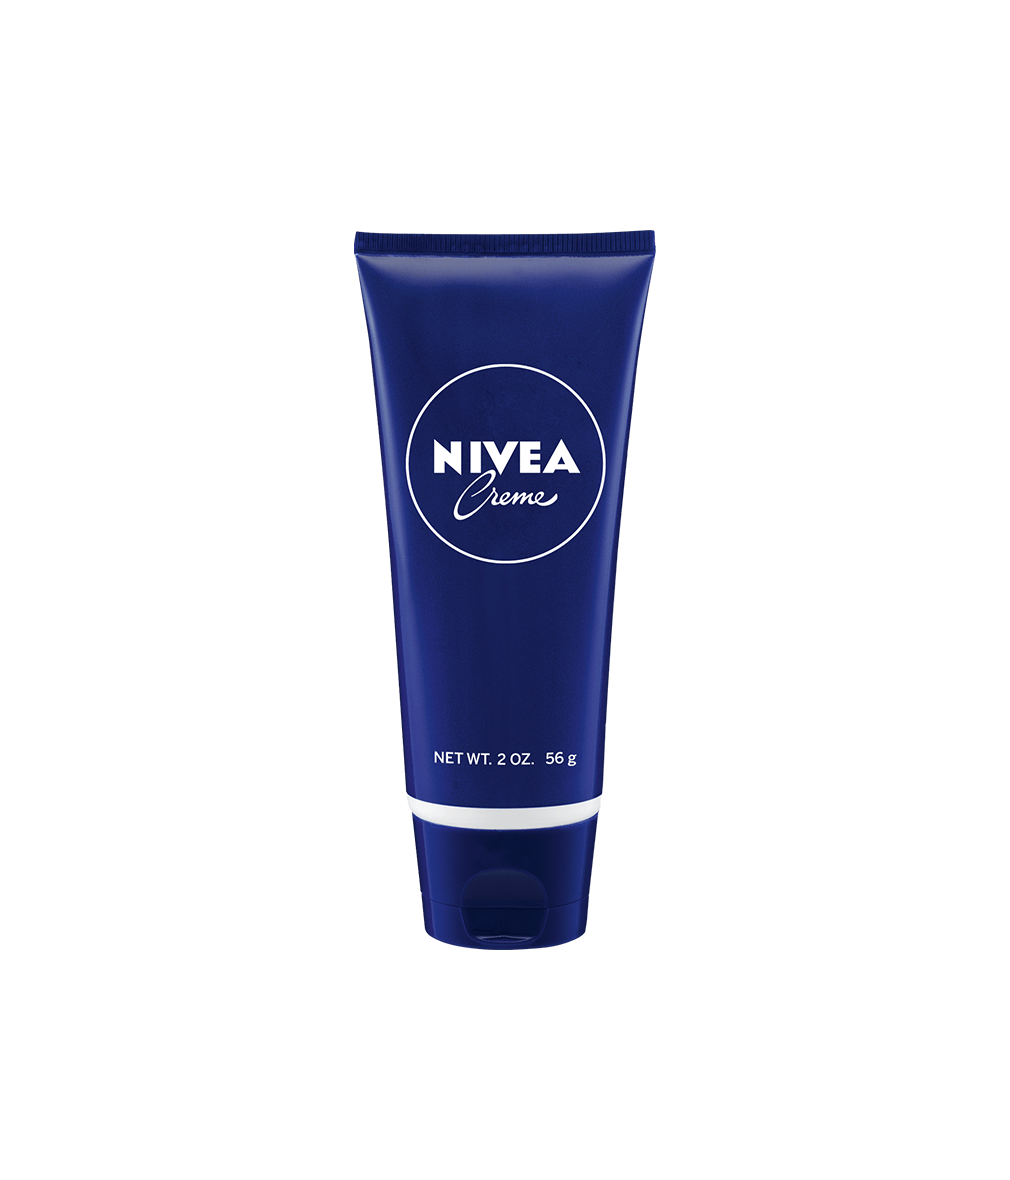  NIVEA Creme Body, Face and Hand Moisturizing Cream, 13.5 Oz  Tin : Body Gels And Creams : Beauty & Personal Care